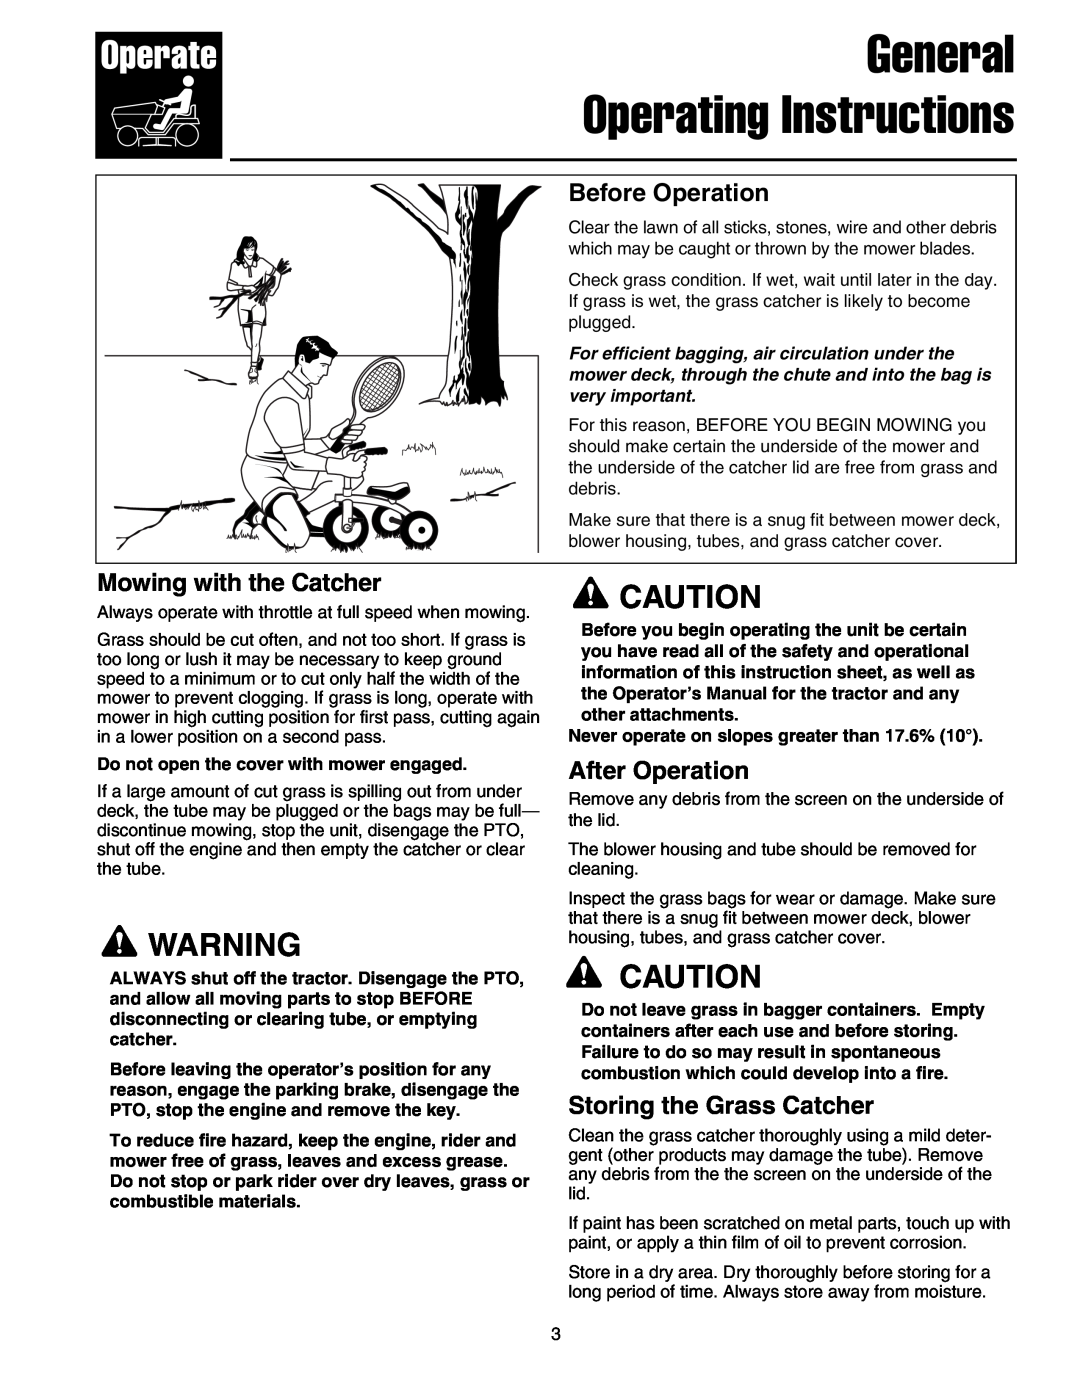 Briggs & Stratton 5900703 manual Before Operation, Mowing with the Catcher, After Operation, Storing the Grass Catcher 